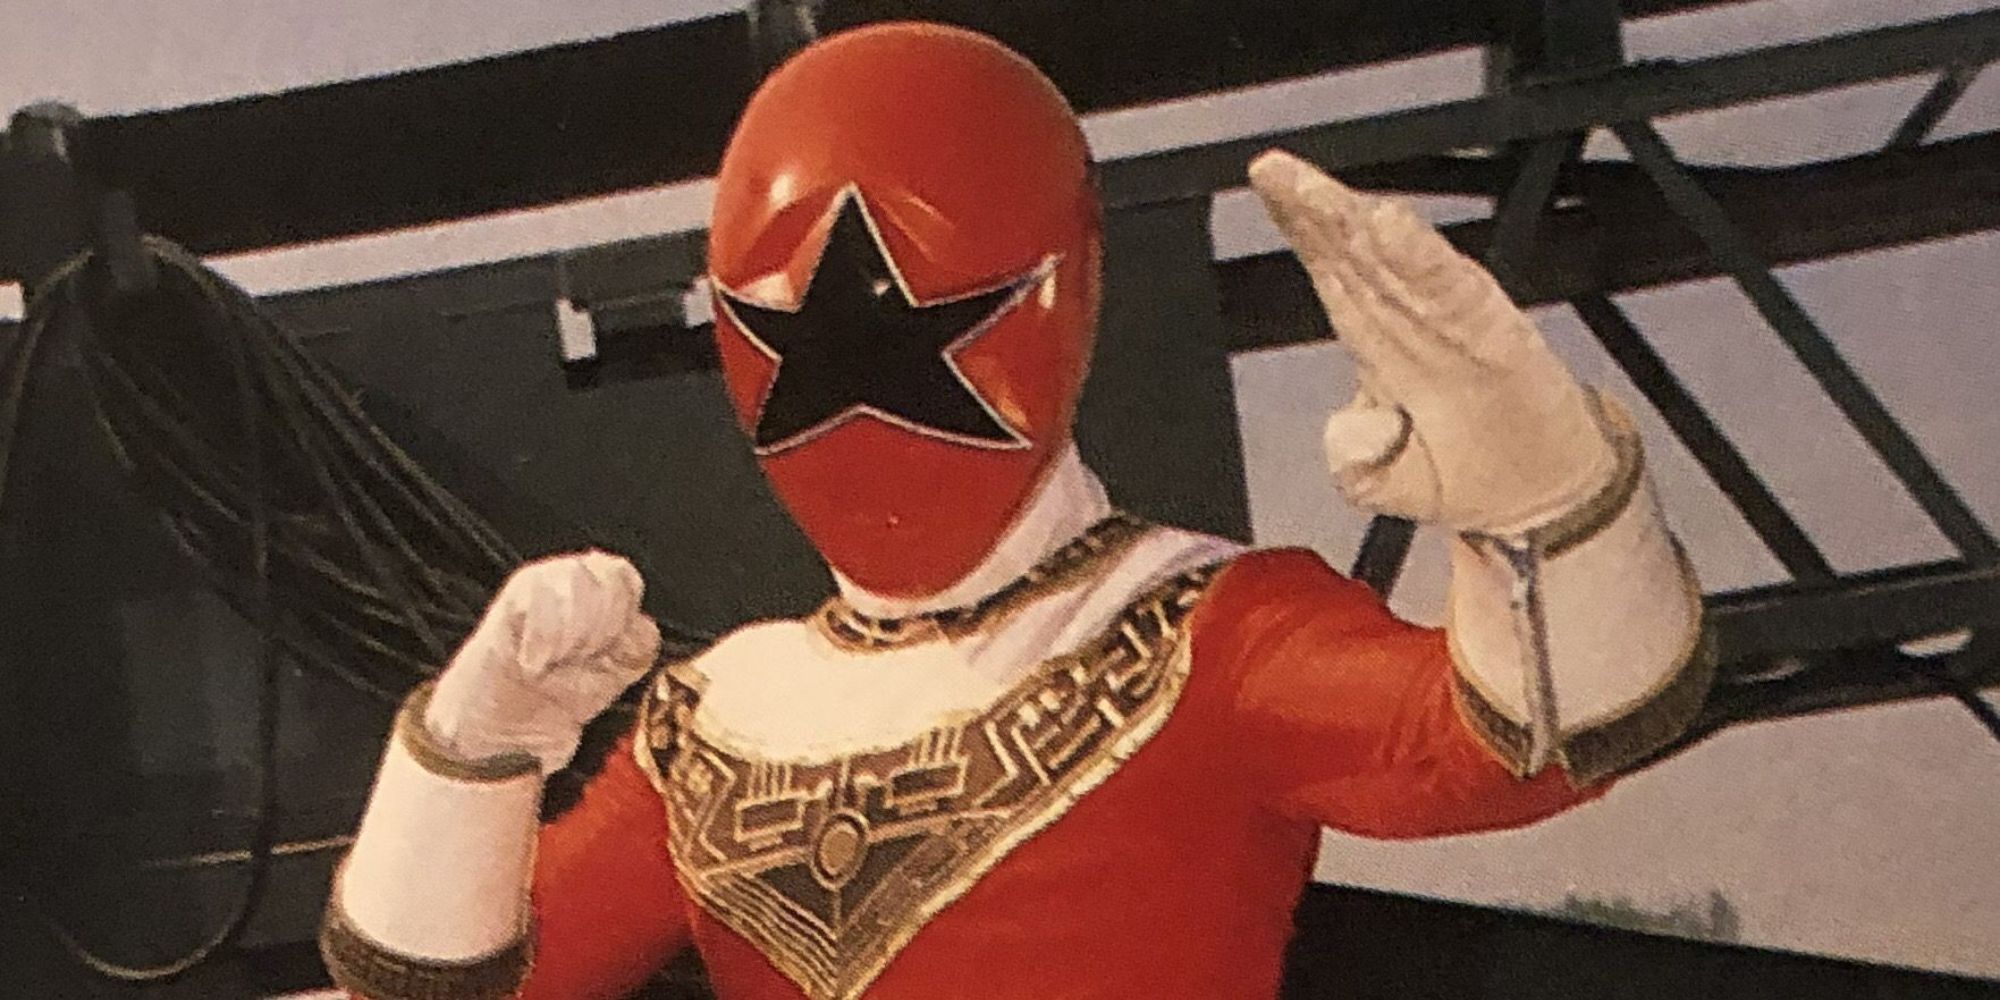 Tommy Oliver ready for a fight in Power Rangers Zeo